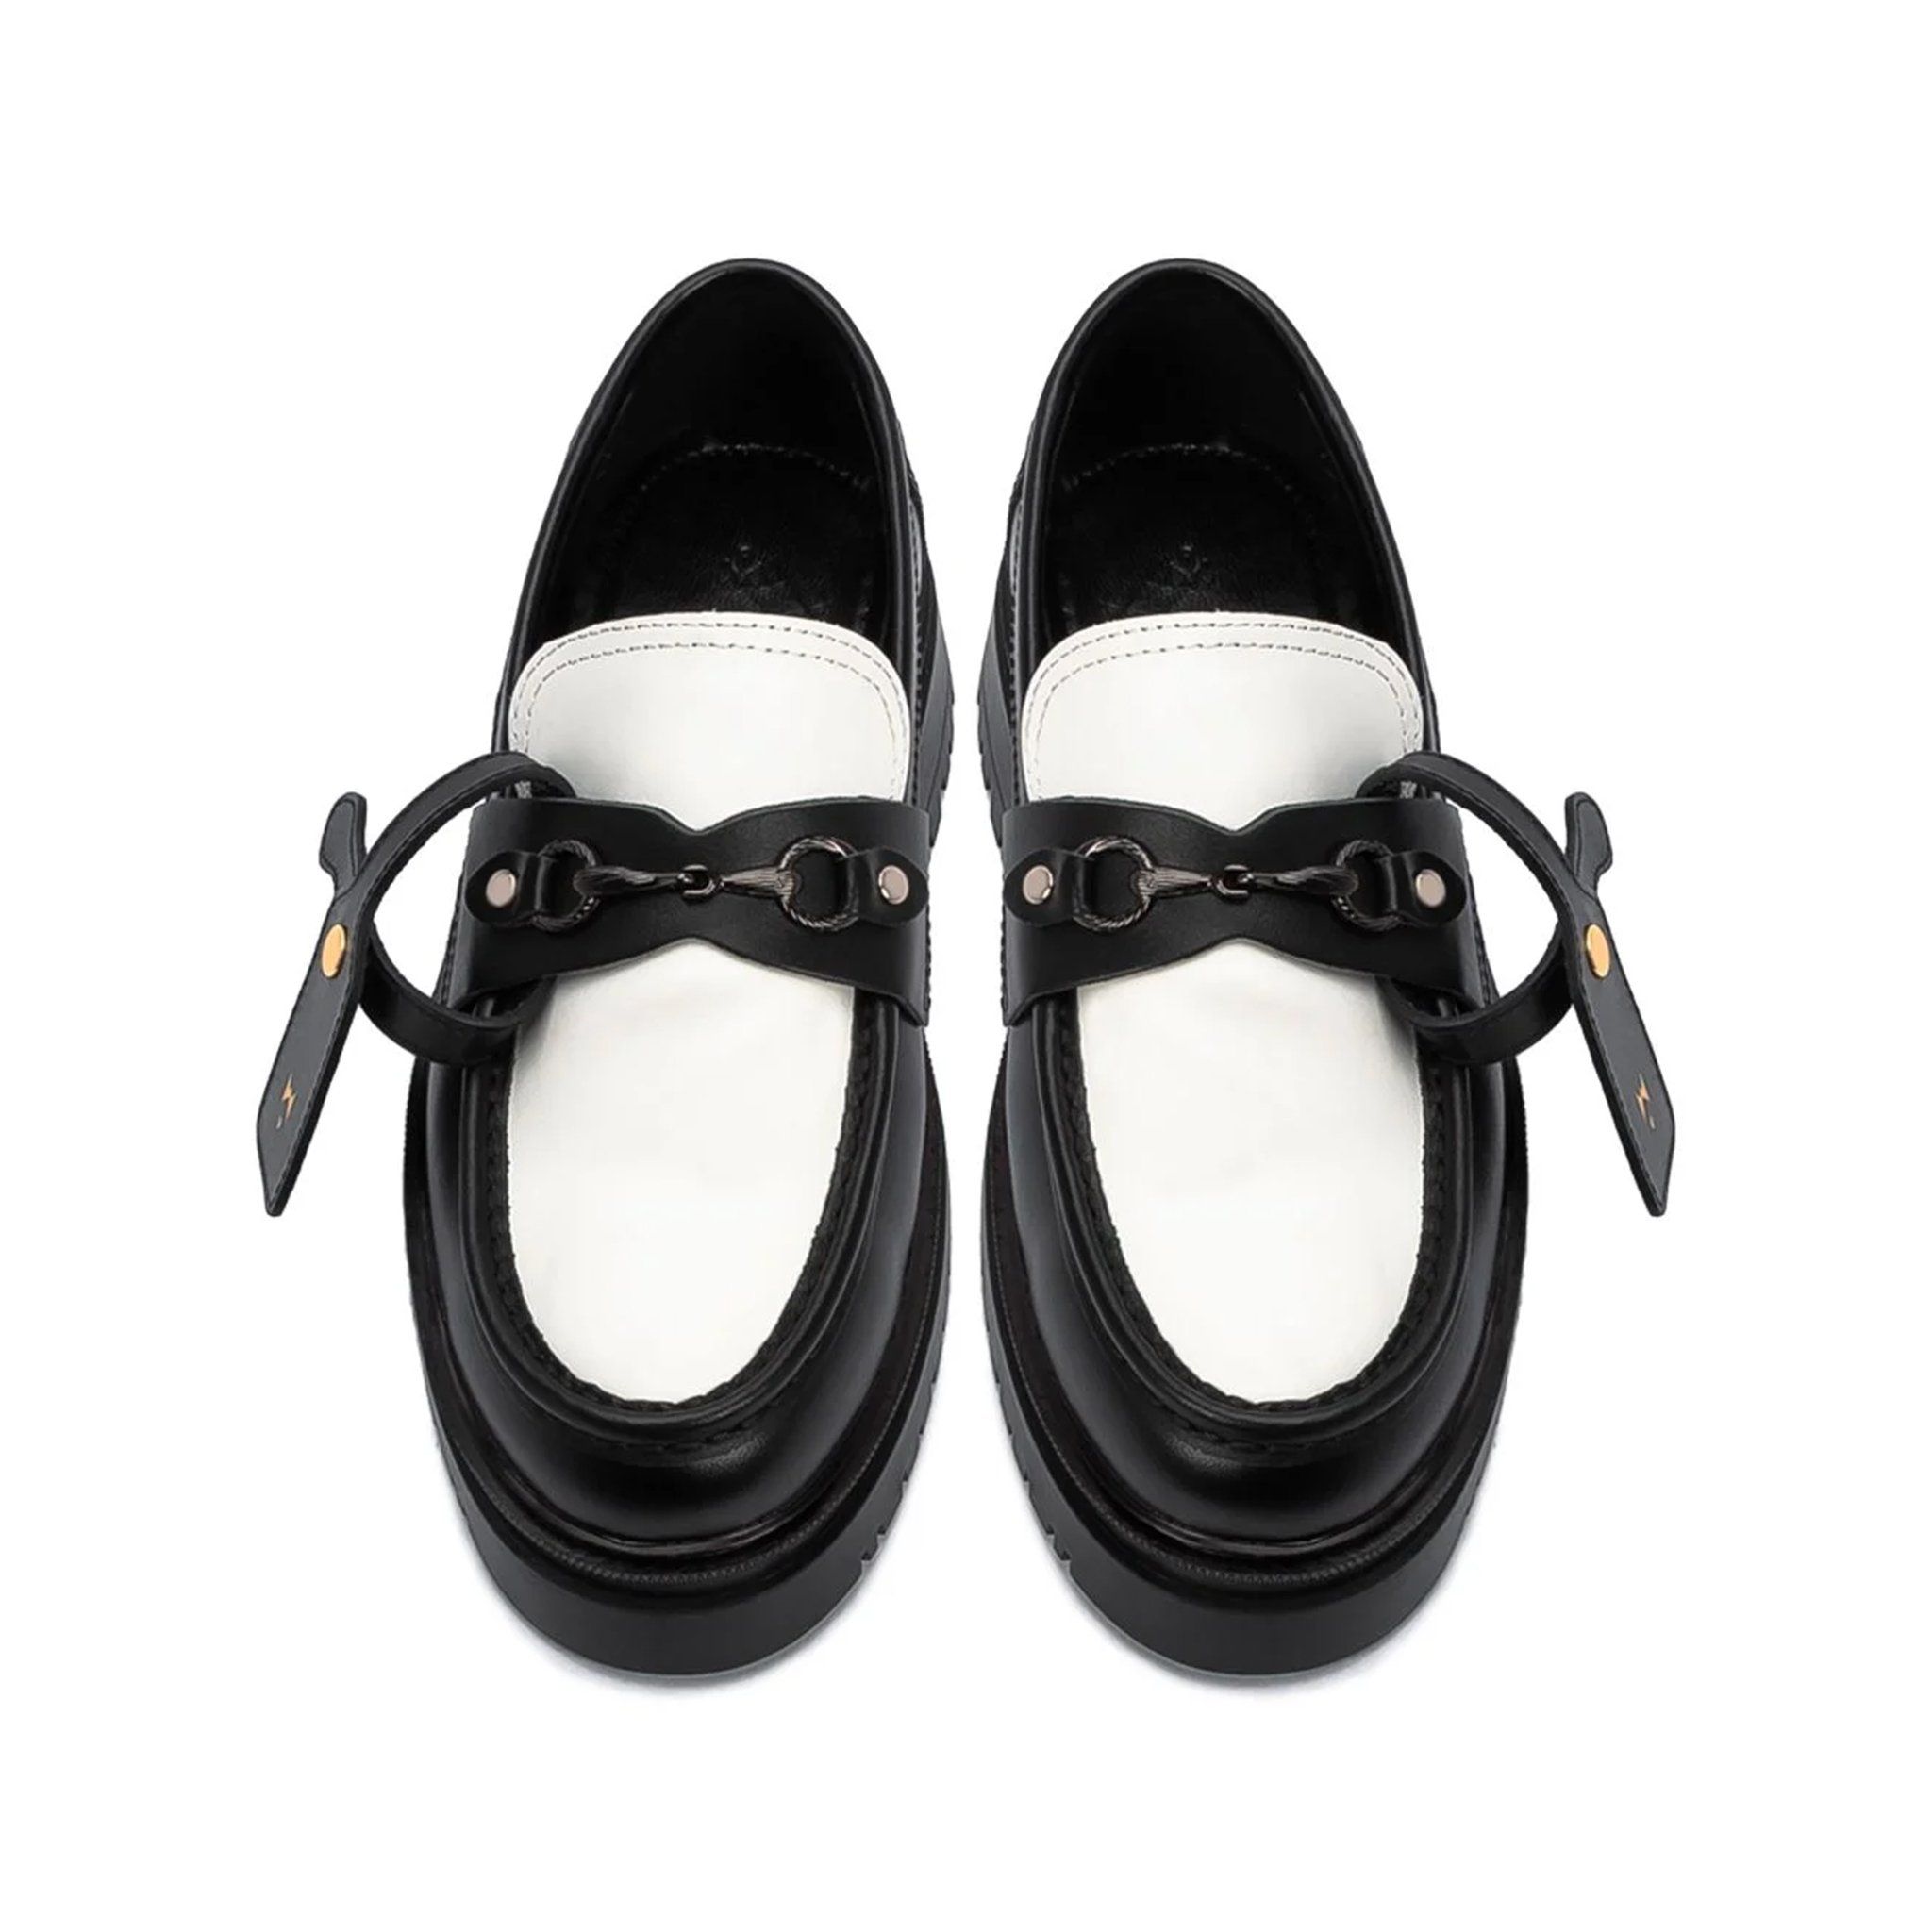  THE LADY WOLF CHUNKY LOAFER - BLACK WHITE 